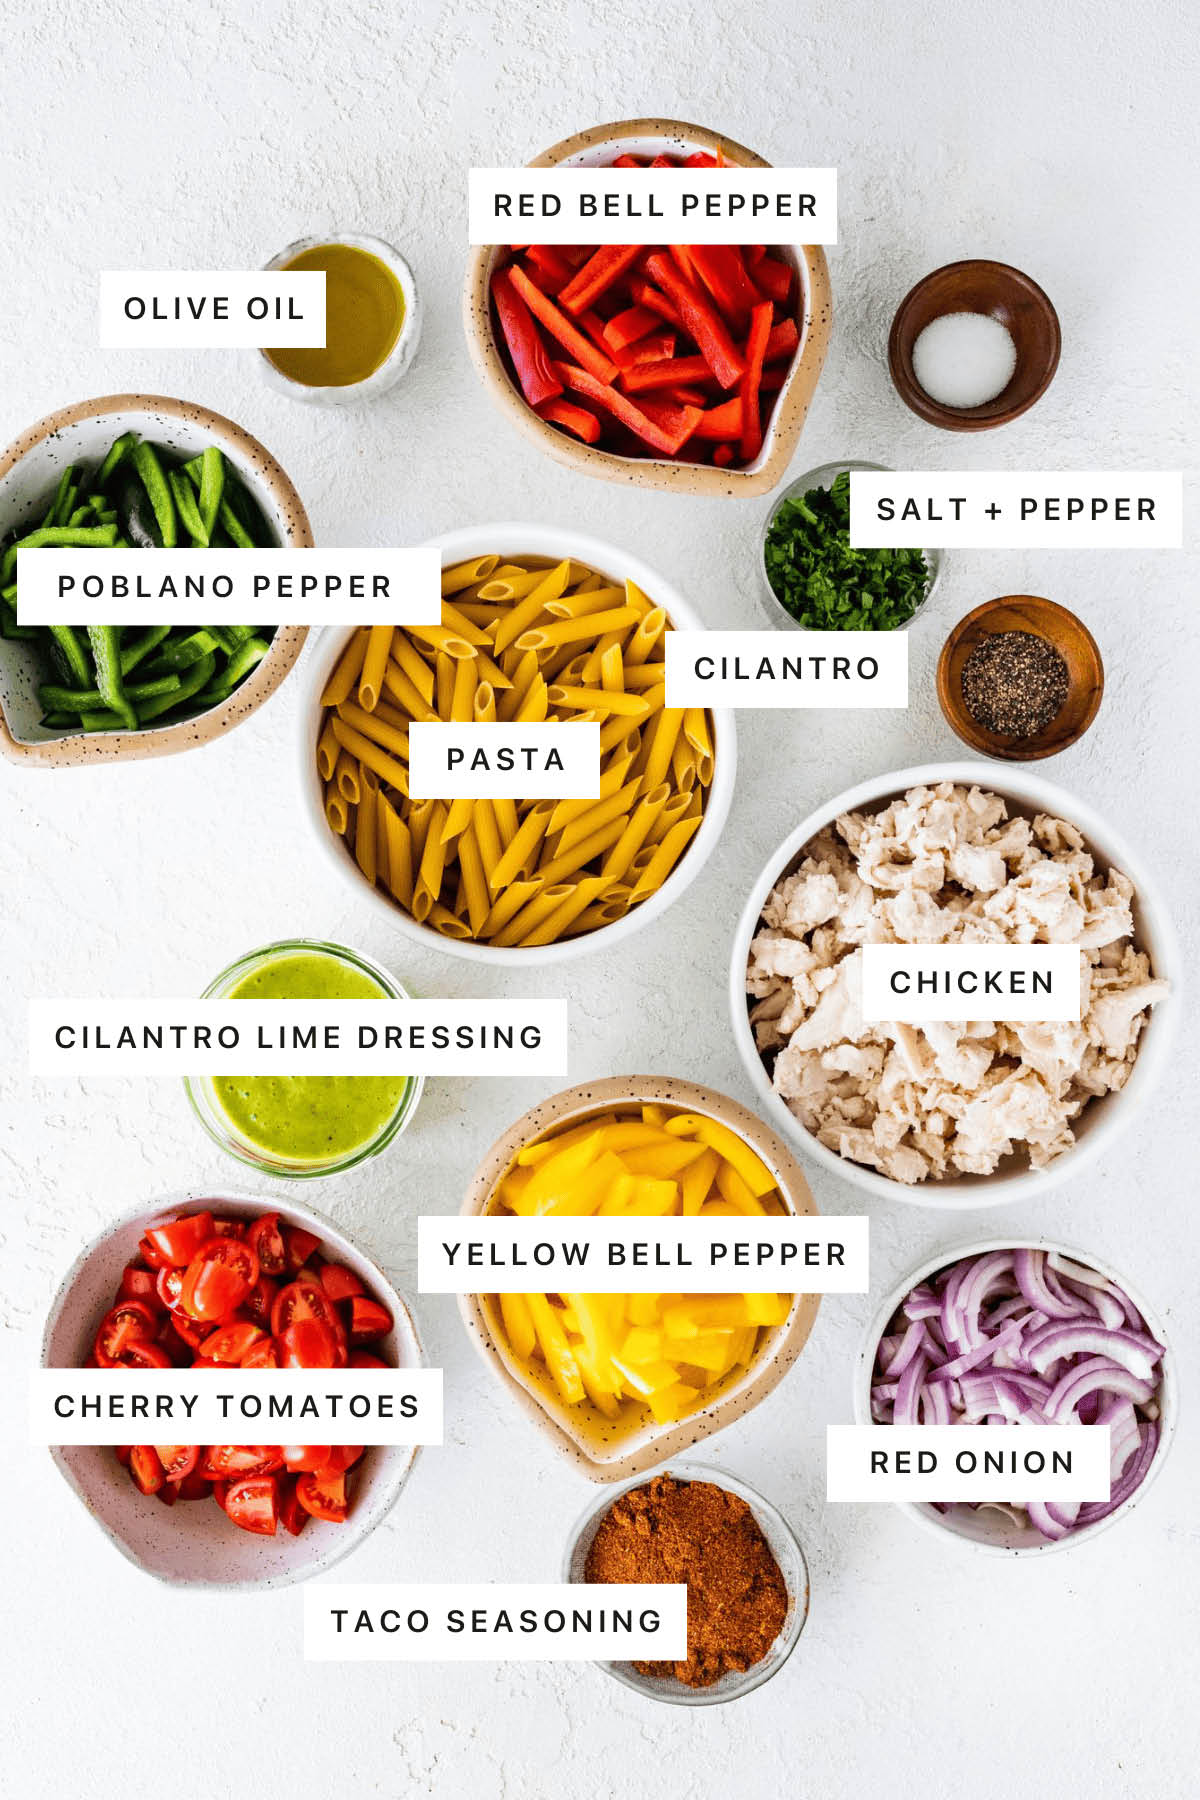 Ingredients measured out to make Chicken Fajita Pasta Salad: olive oil, red belle pepper, salt, pepper, cilantro, poblano pepper, pasta, chicken, cilantro lime dressing, yellow bell pepper, cherry tomatoes, taco seasoning and red onion.